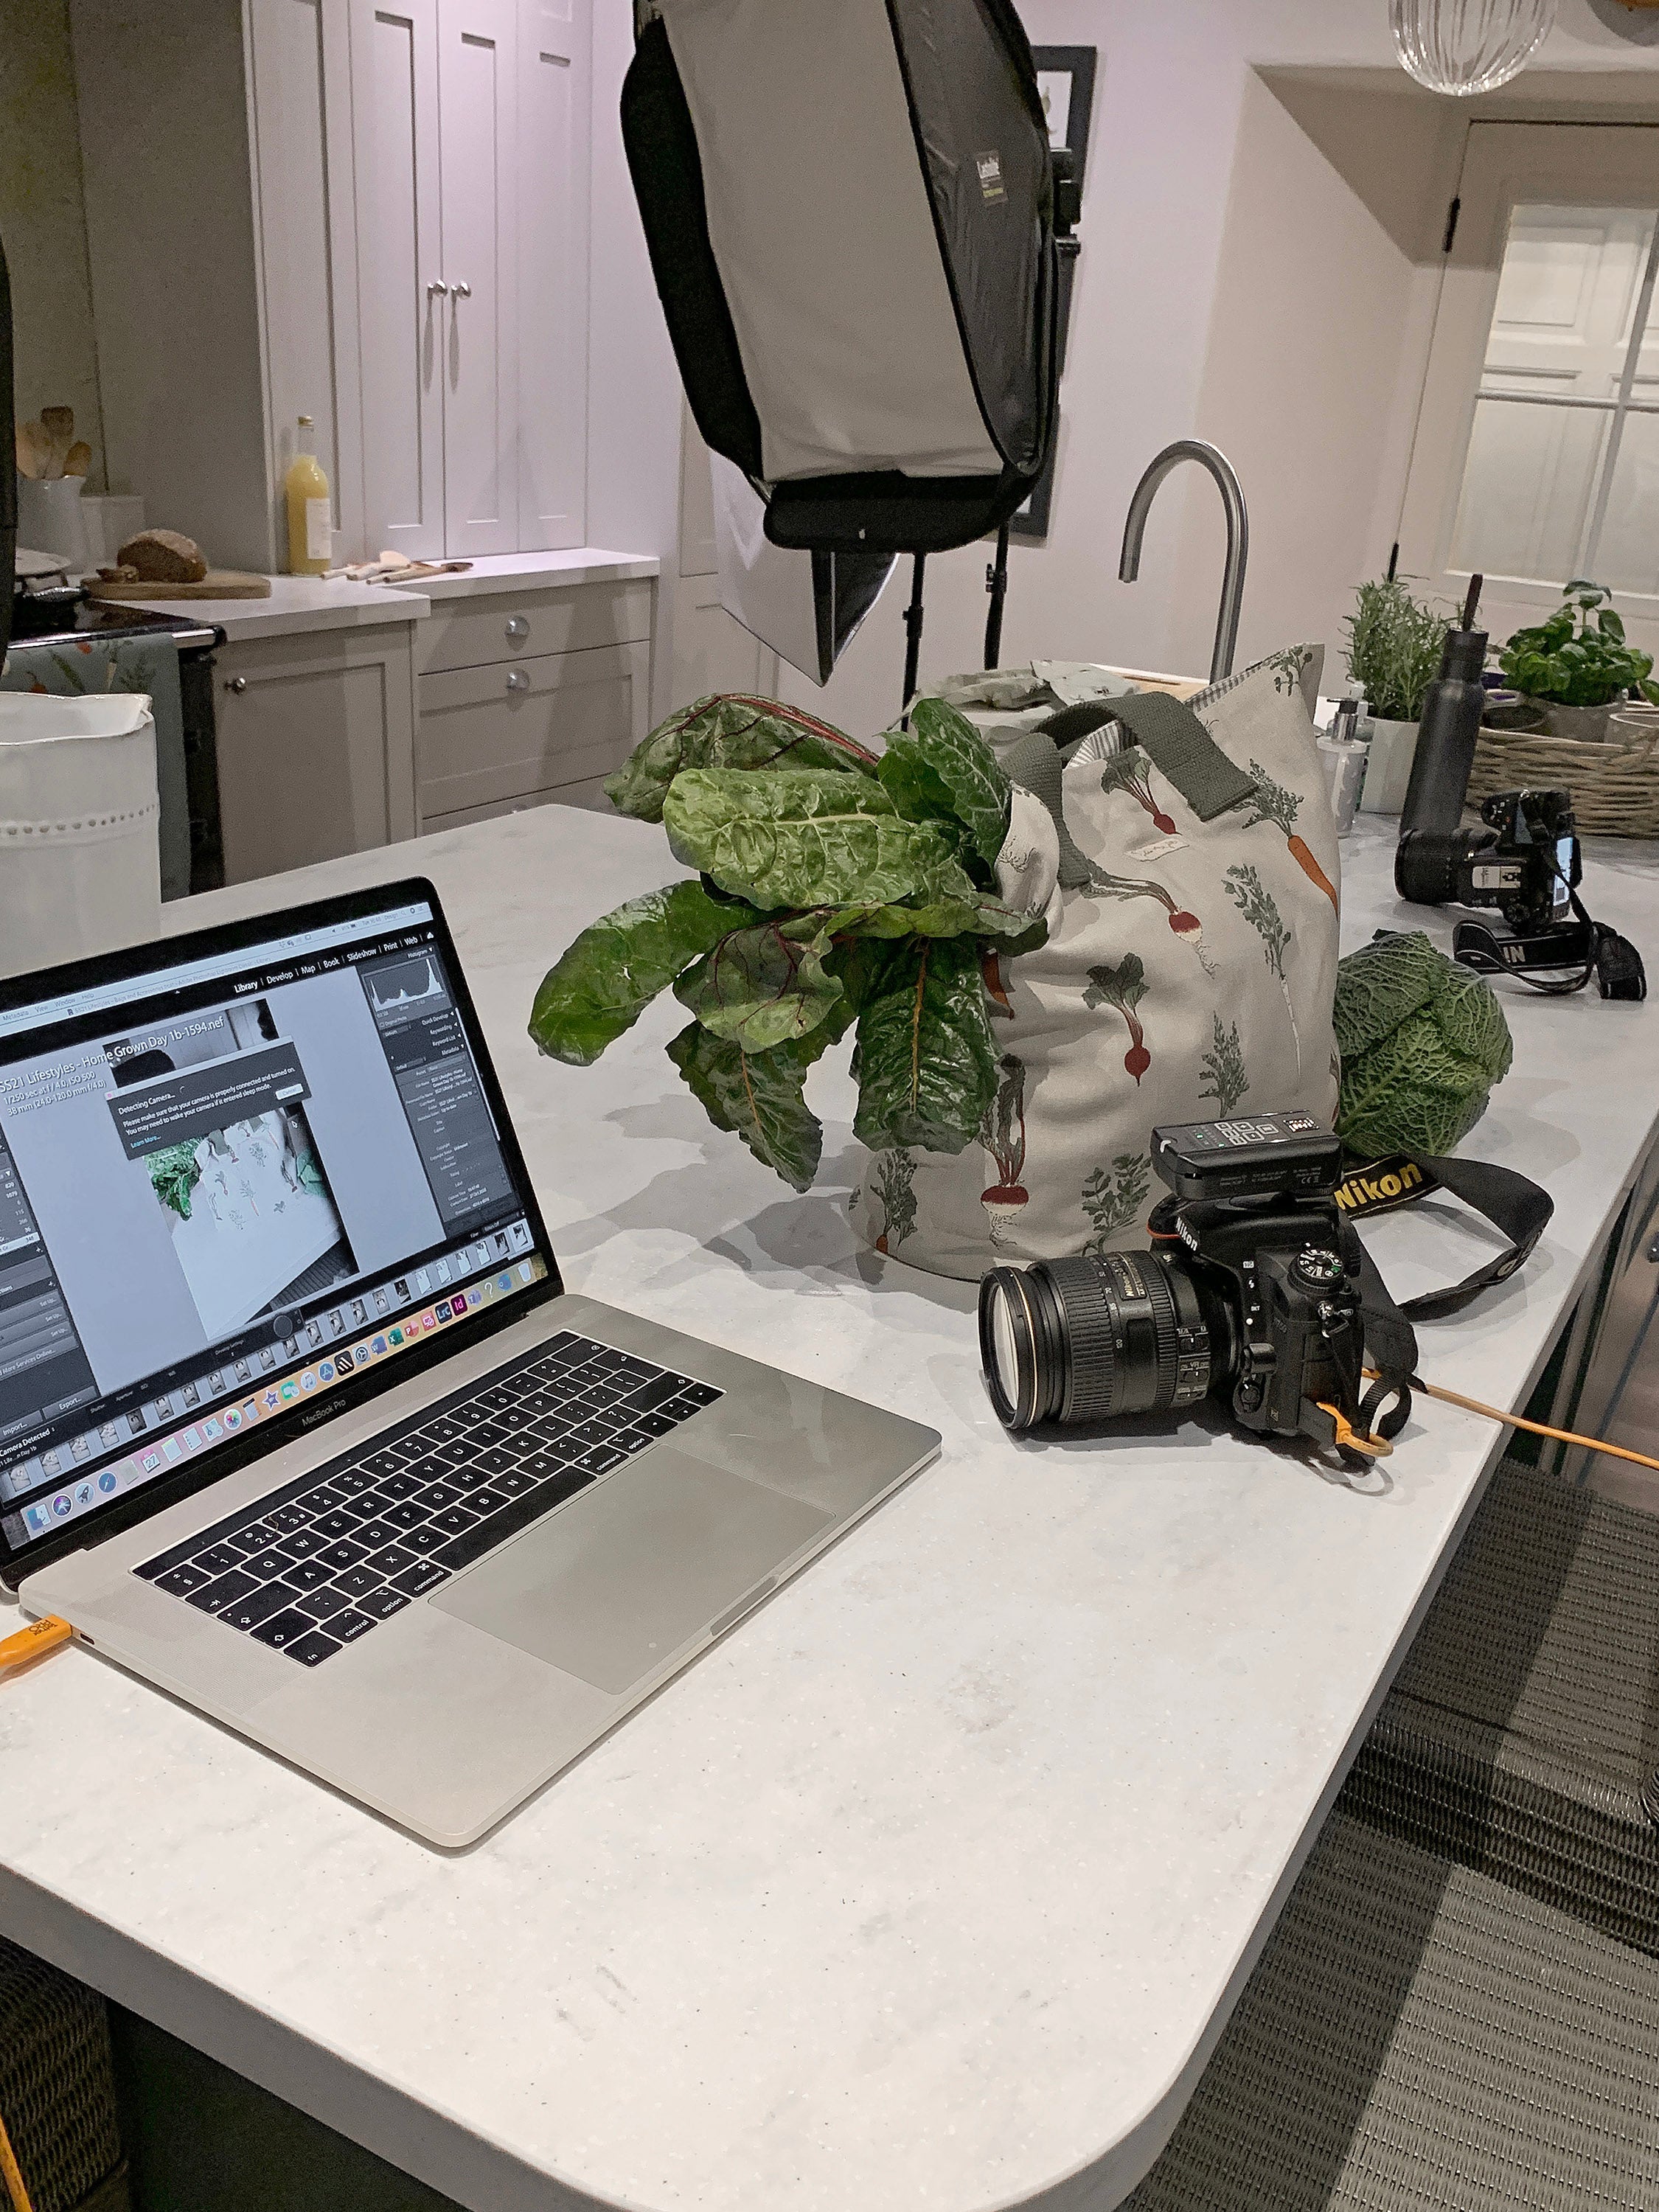 Behind The Scenes Of Our Home Grown Photoshoot